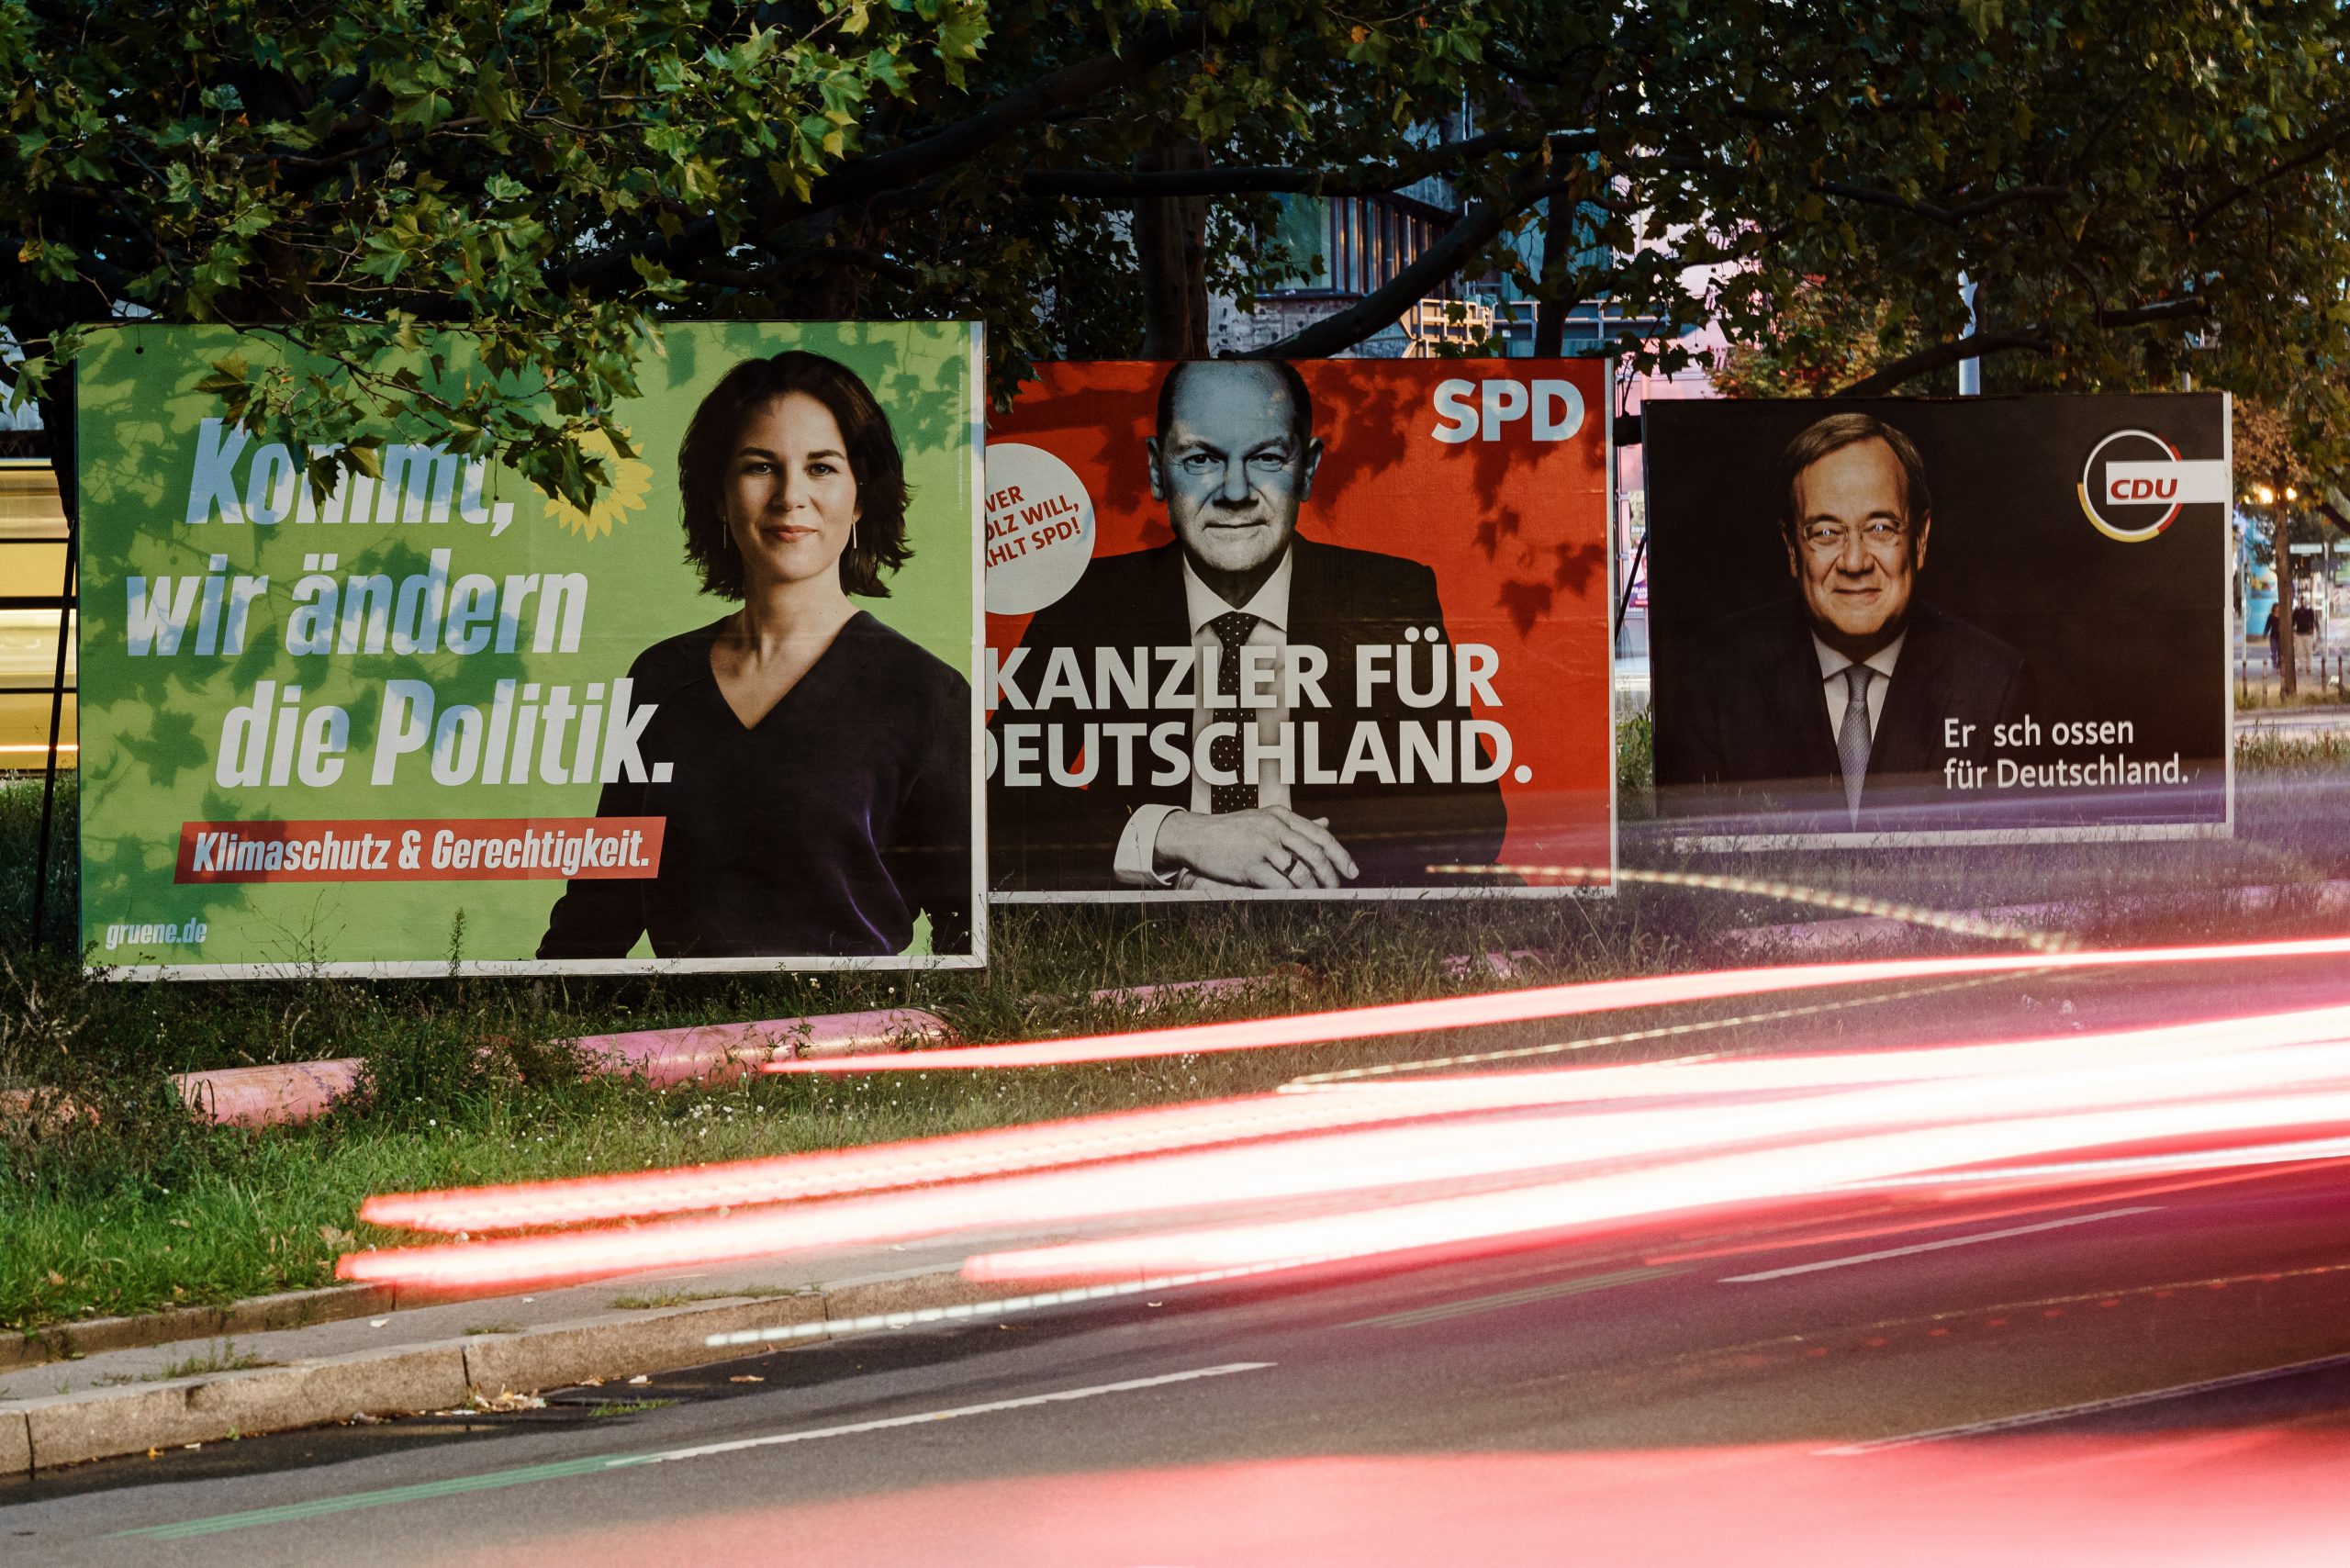 epa09488198 Campaigning posters of the Green party (L), the Social Democrats (C) and the Christian Democratic Union (R) show the top candidates Annalena Baerbock (L), Olaf Scholz (C) and Armin Laschet (R) in Berlin, Germany, 25 September 2021. German federal elections take place on 26 September 2021.  EPA/CLEMENS BILAN